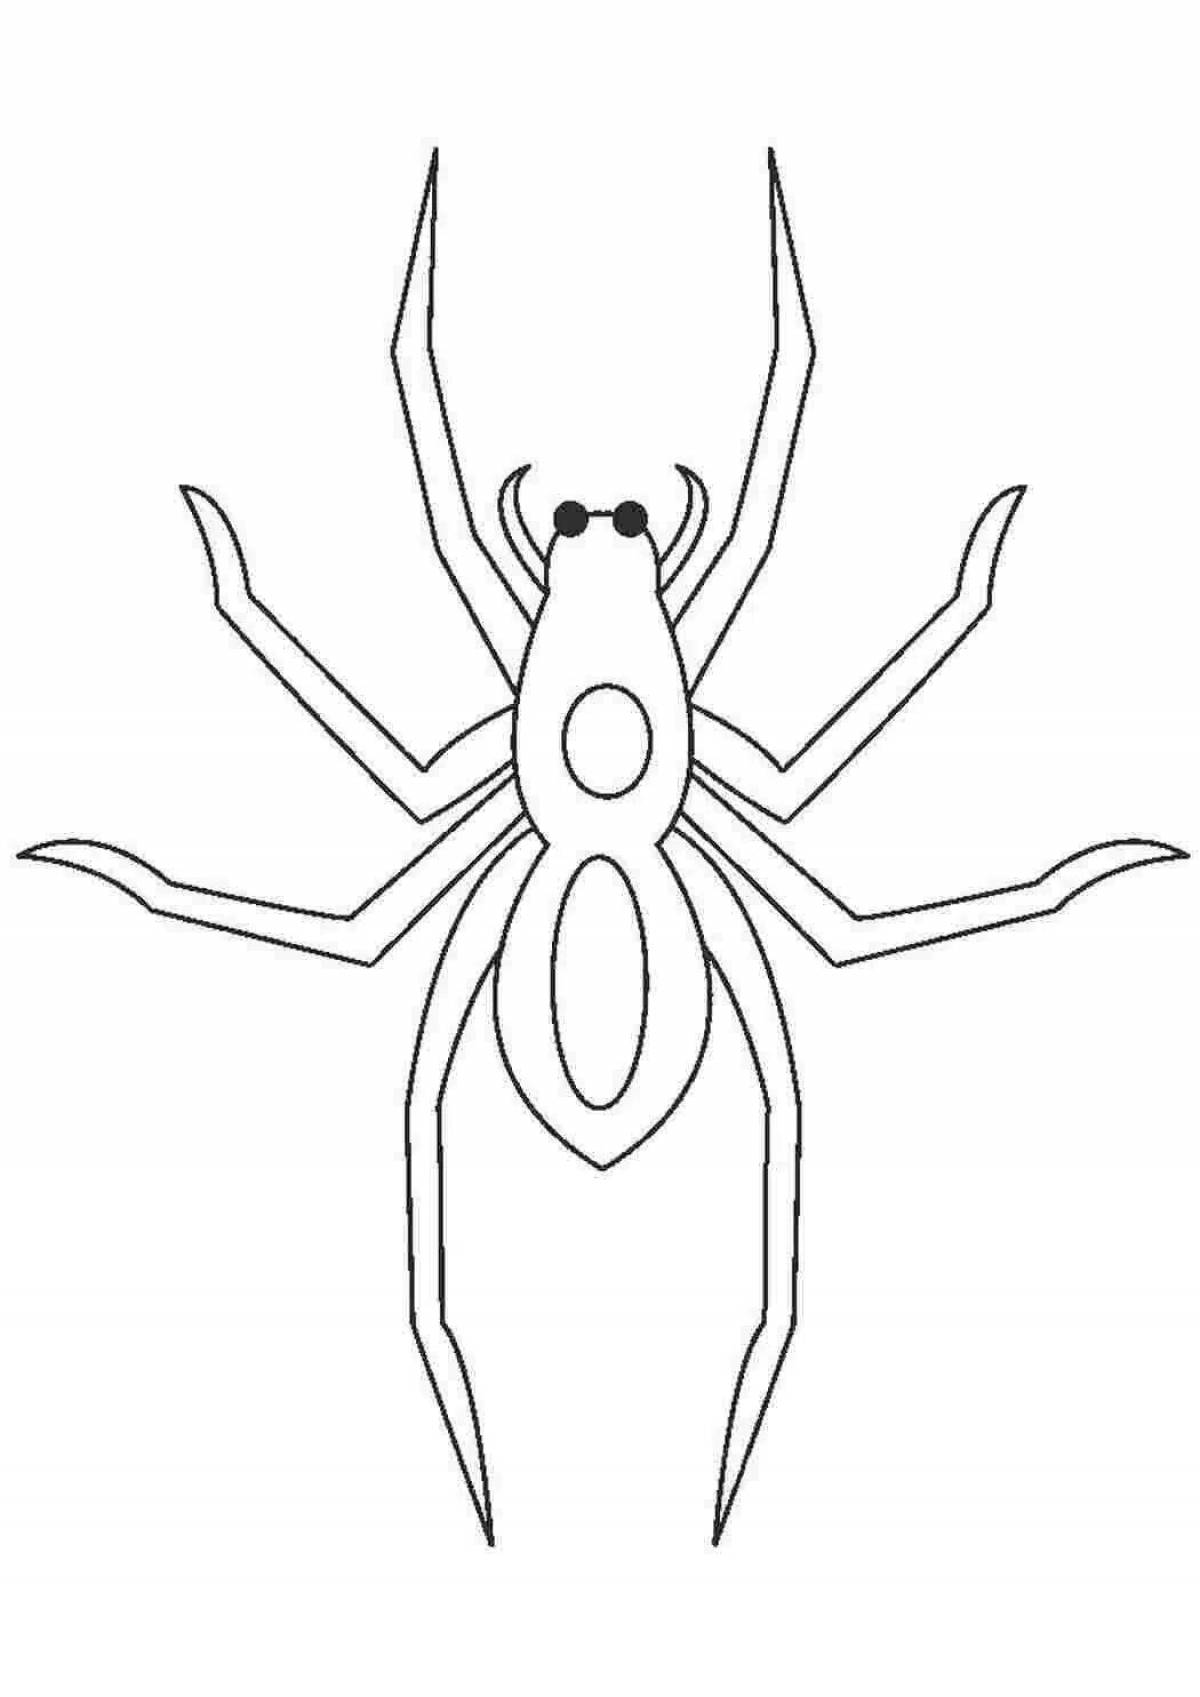 Bright drawing of a spider